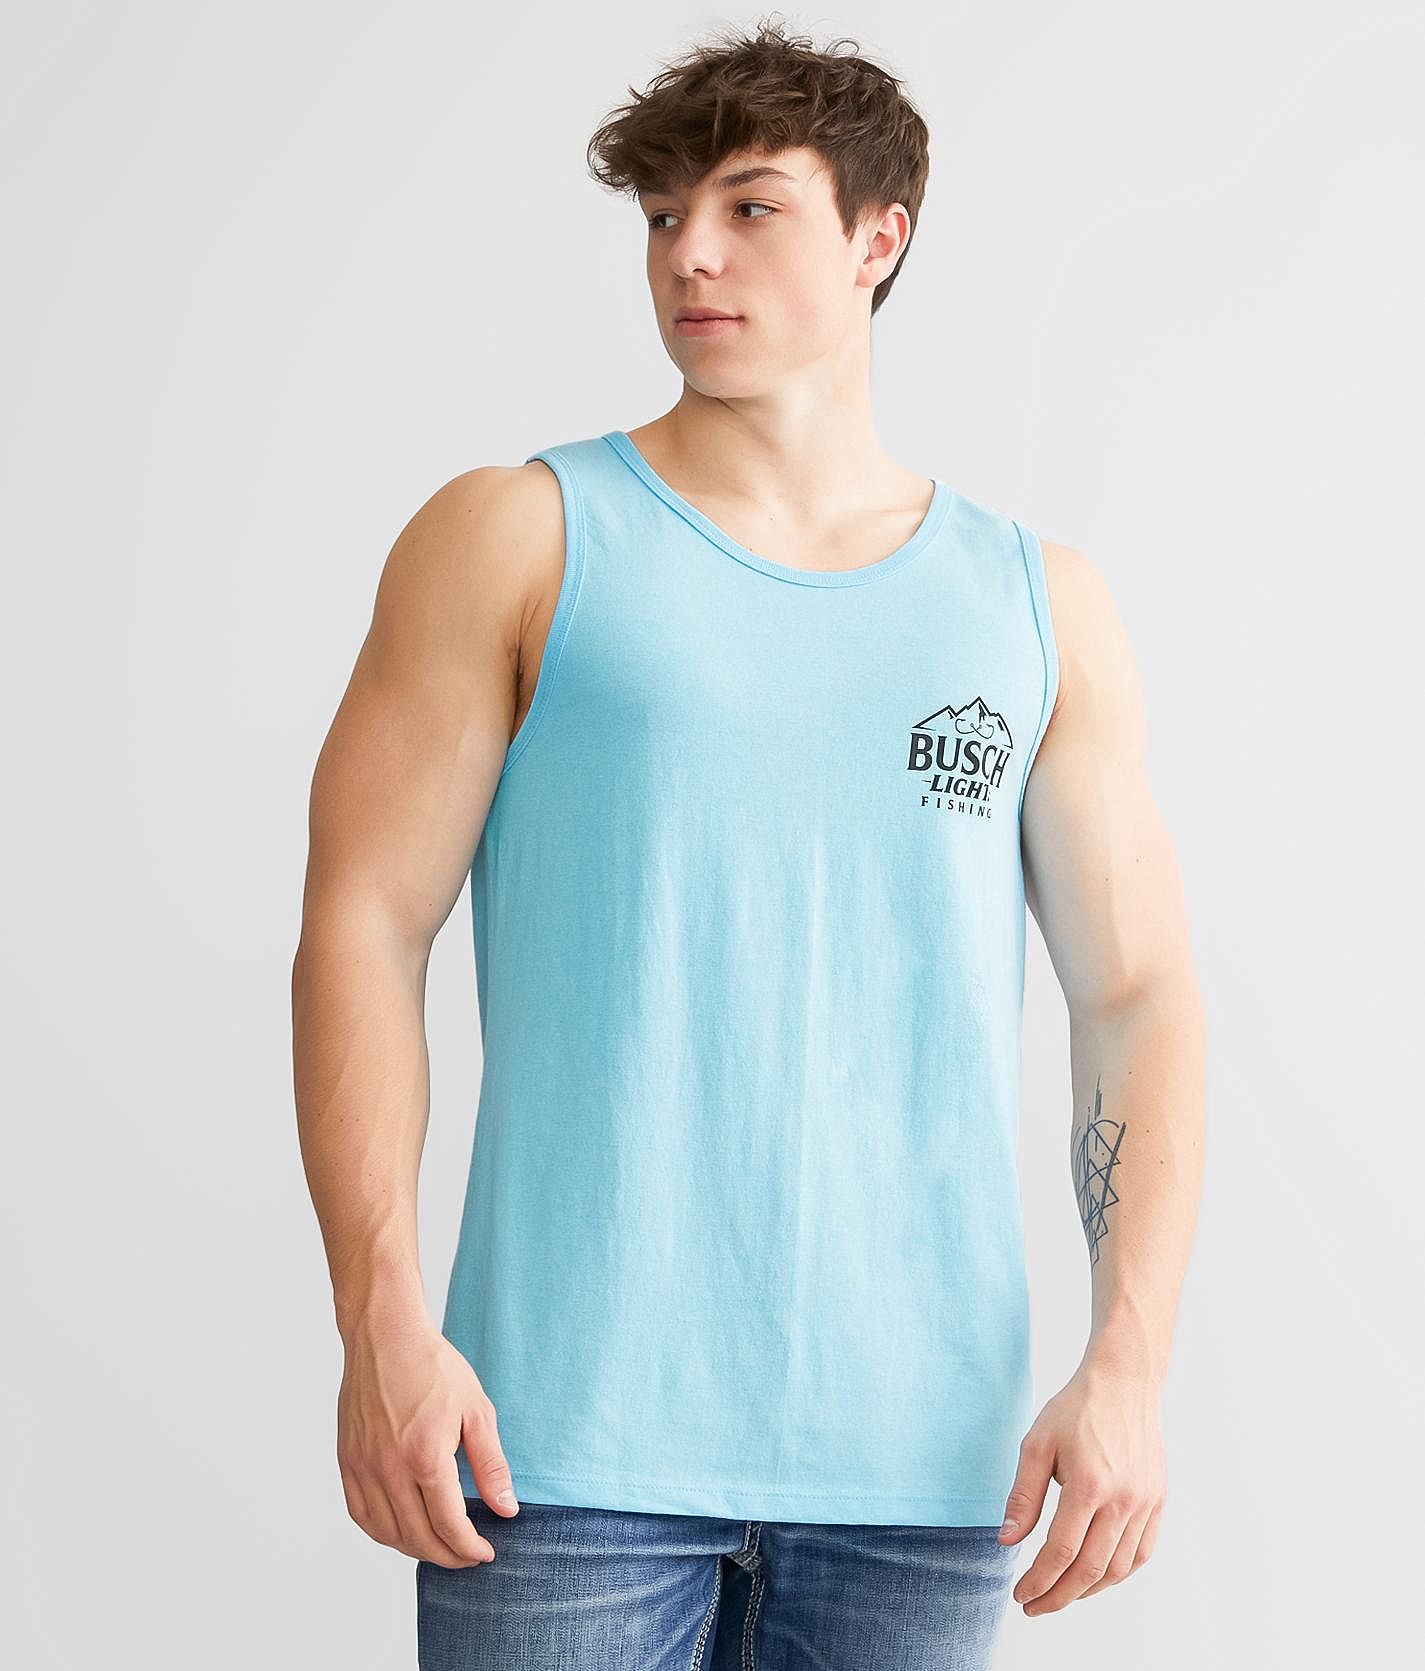 Brew City Busch Light Fishing Tank Top - Turquoise Large, Men's